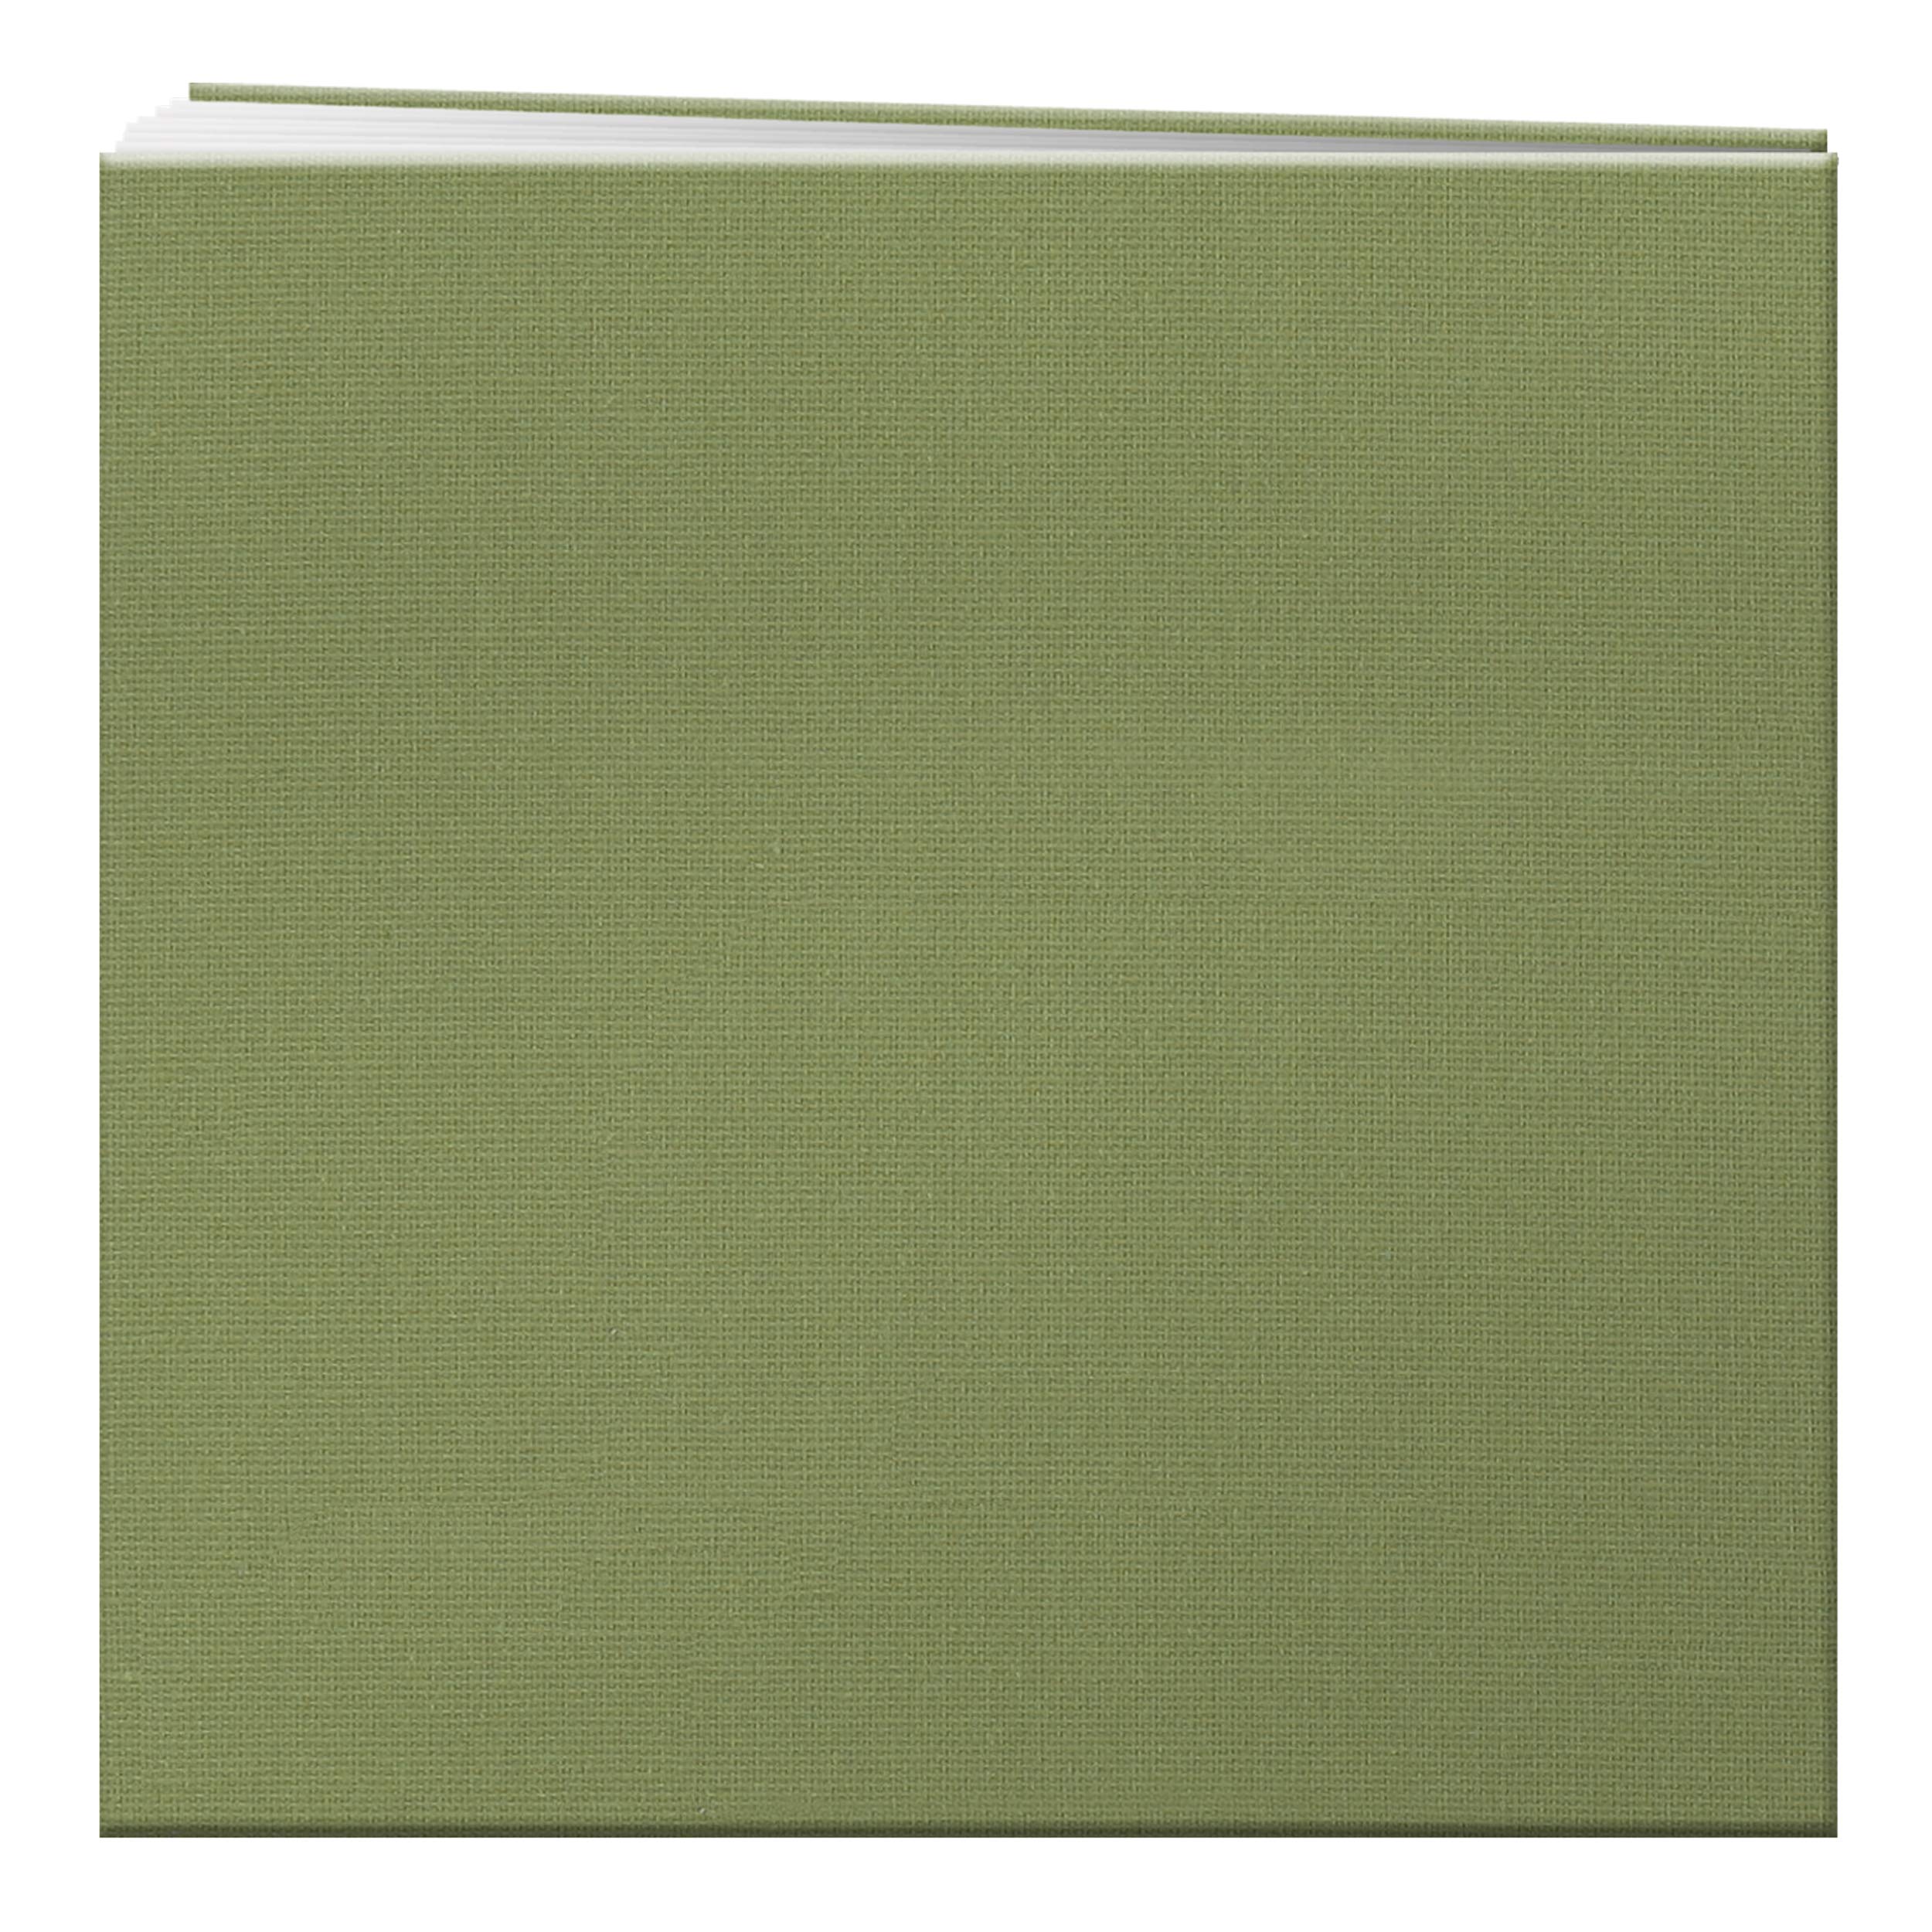 Pioneer 12-Inch by 12-Inch Cloth Cover Postbound Memory Book with Window, Sage Green